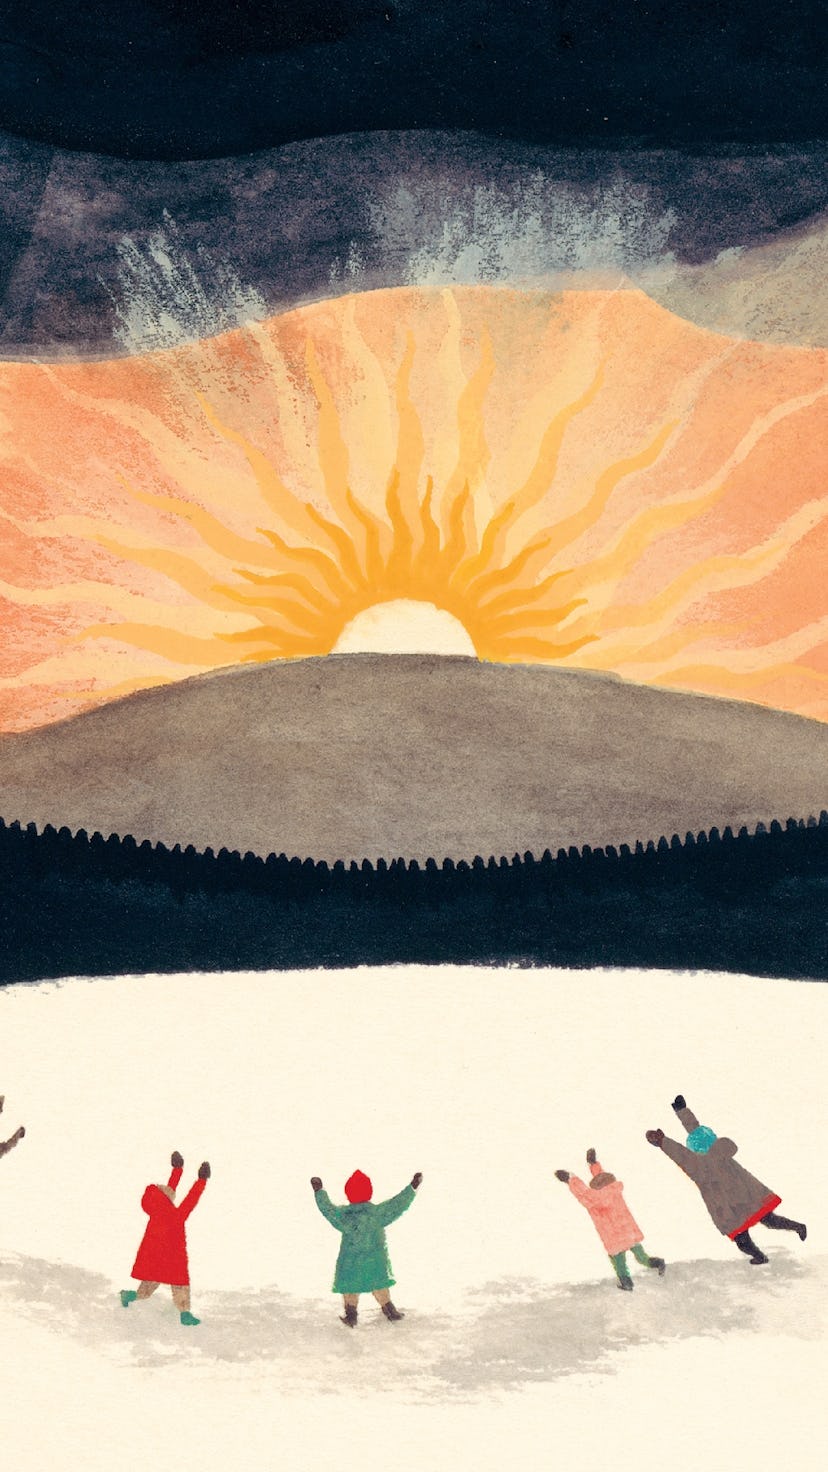 Cover of The Shortest Day by Susan Cooper, illustrated by Carson Ellis